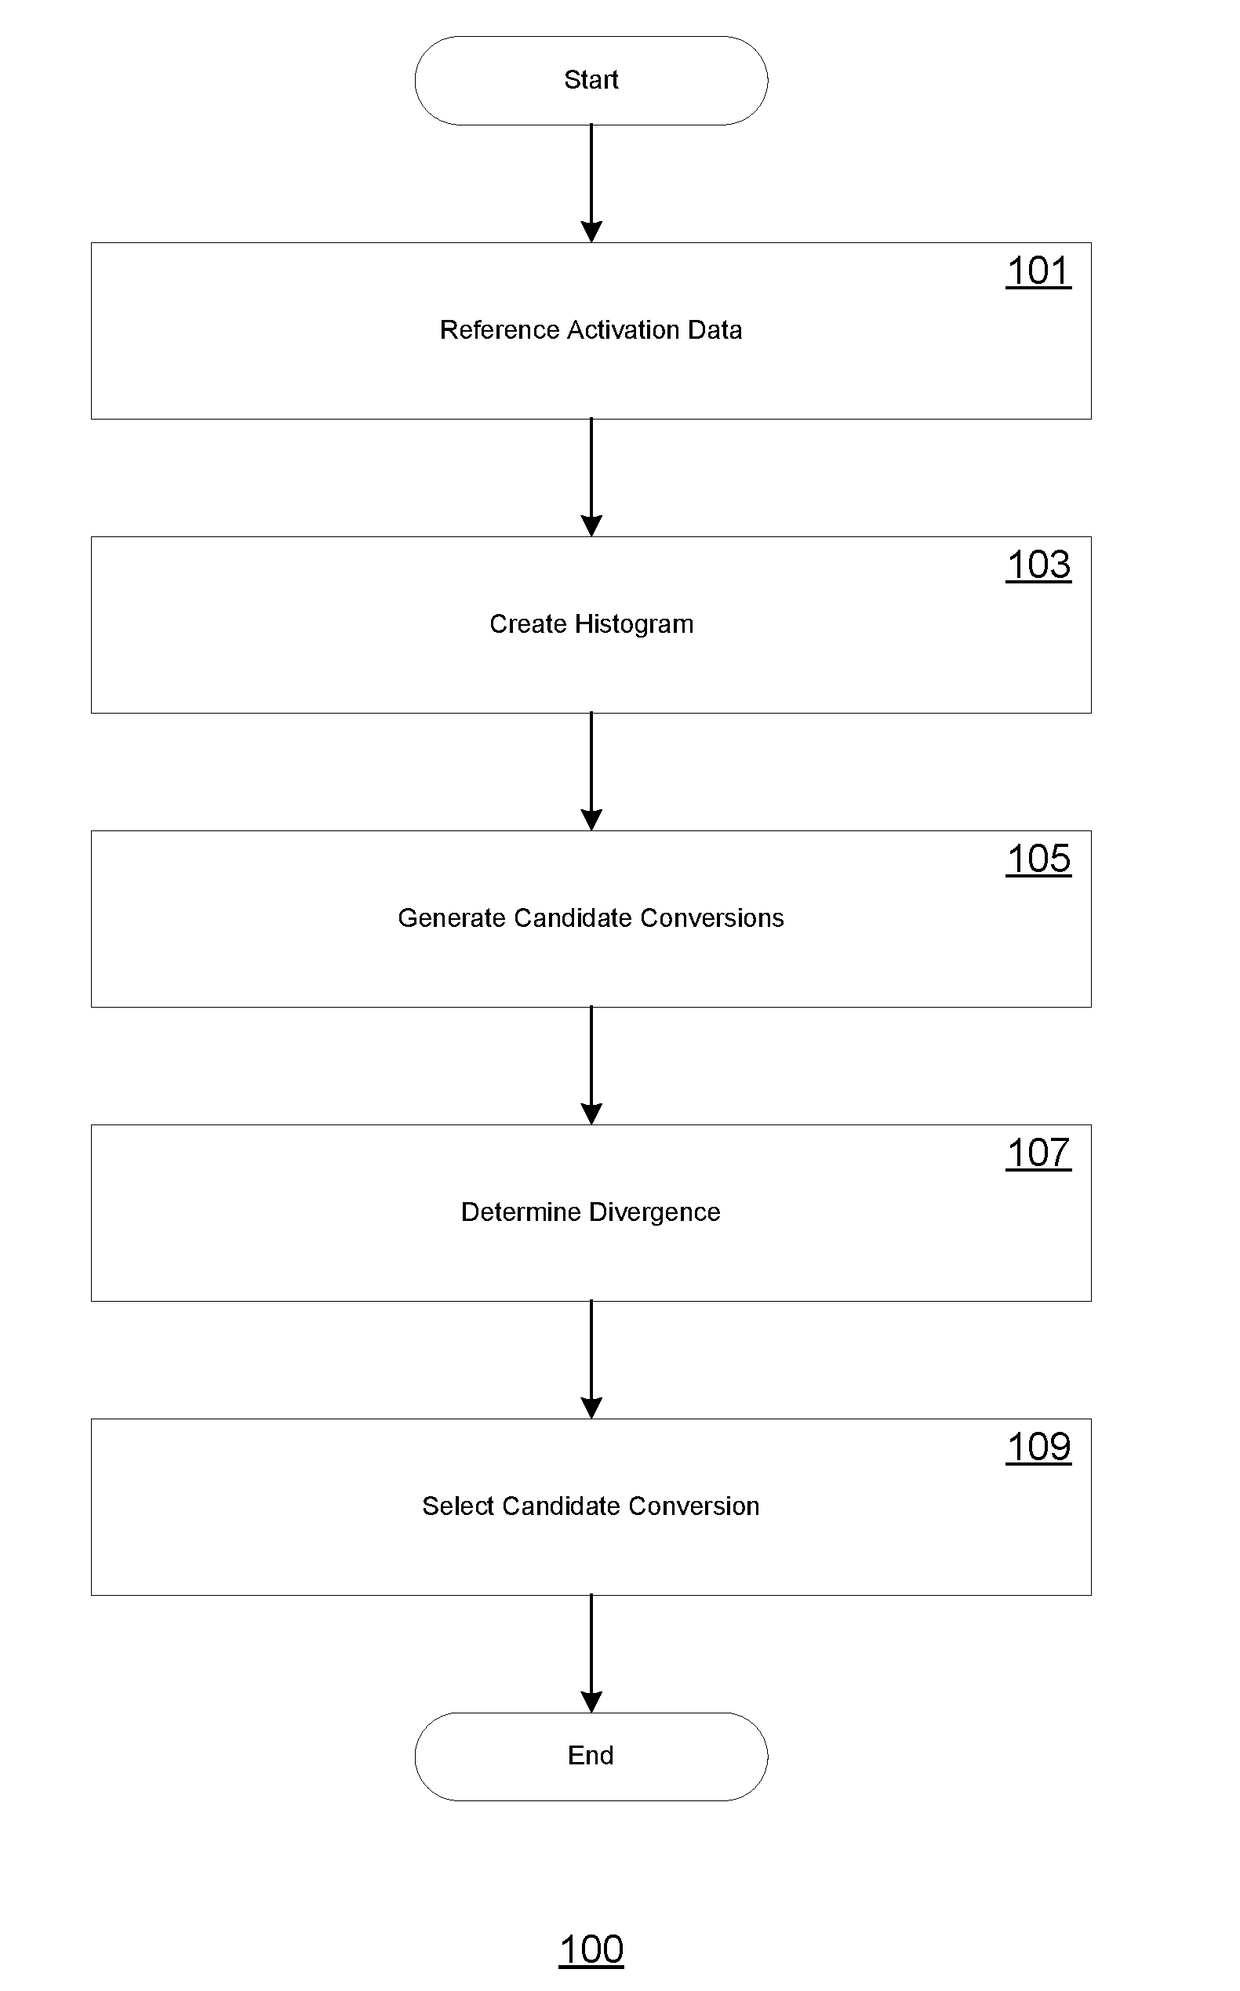 Automated methods for conversions to a lower precision data format